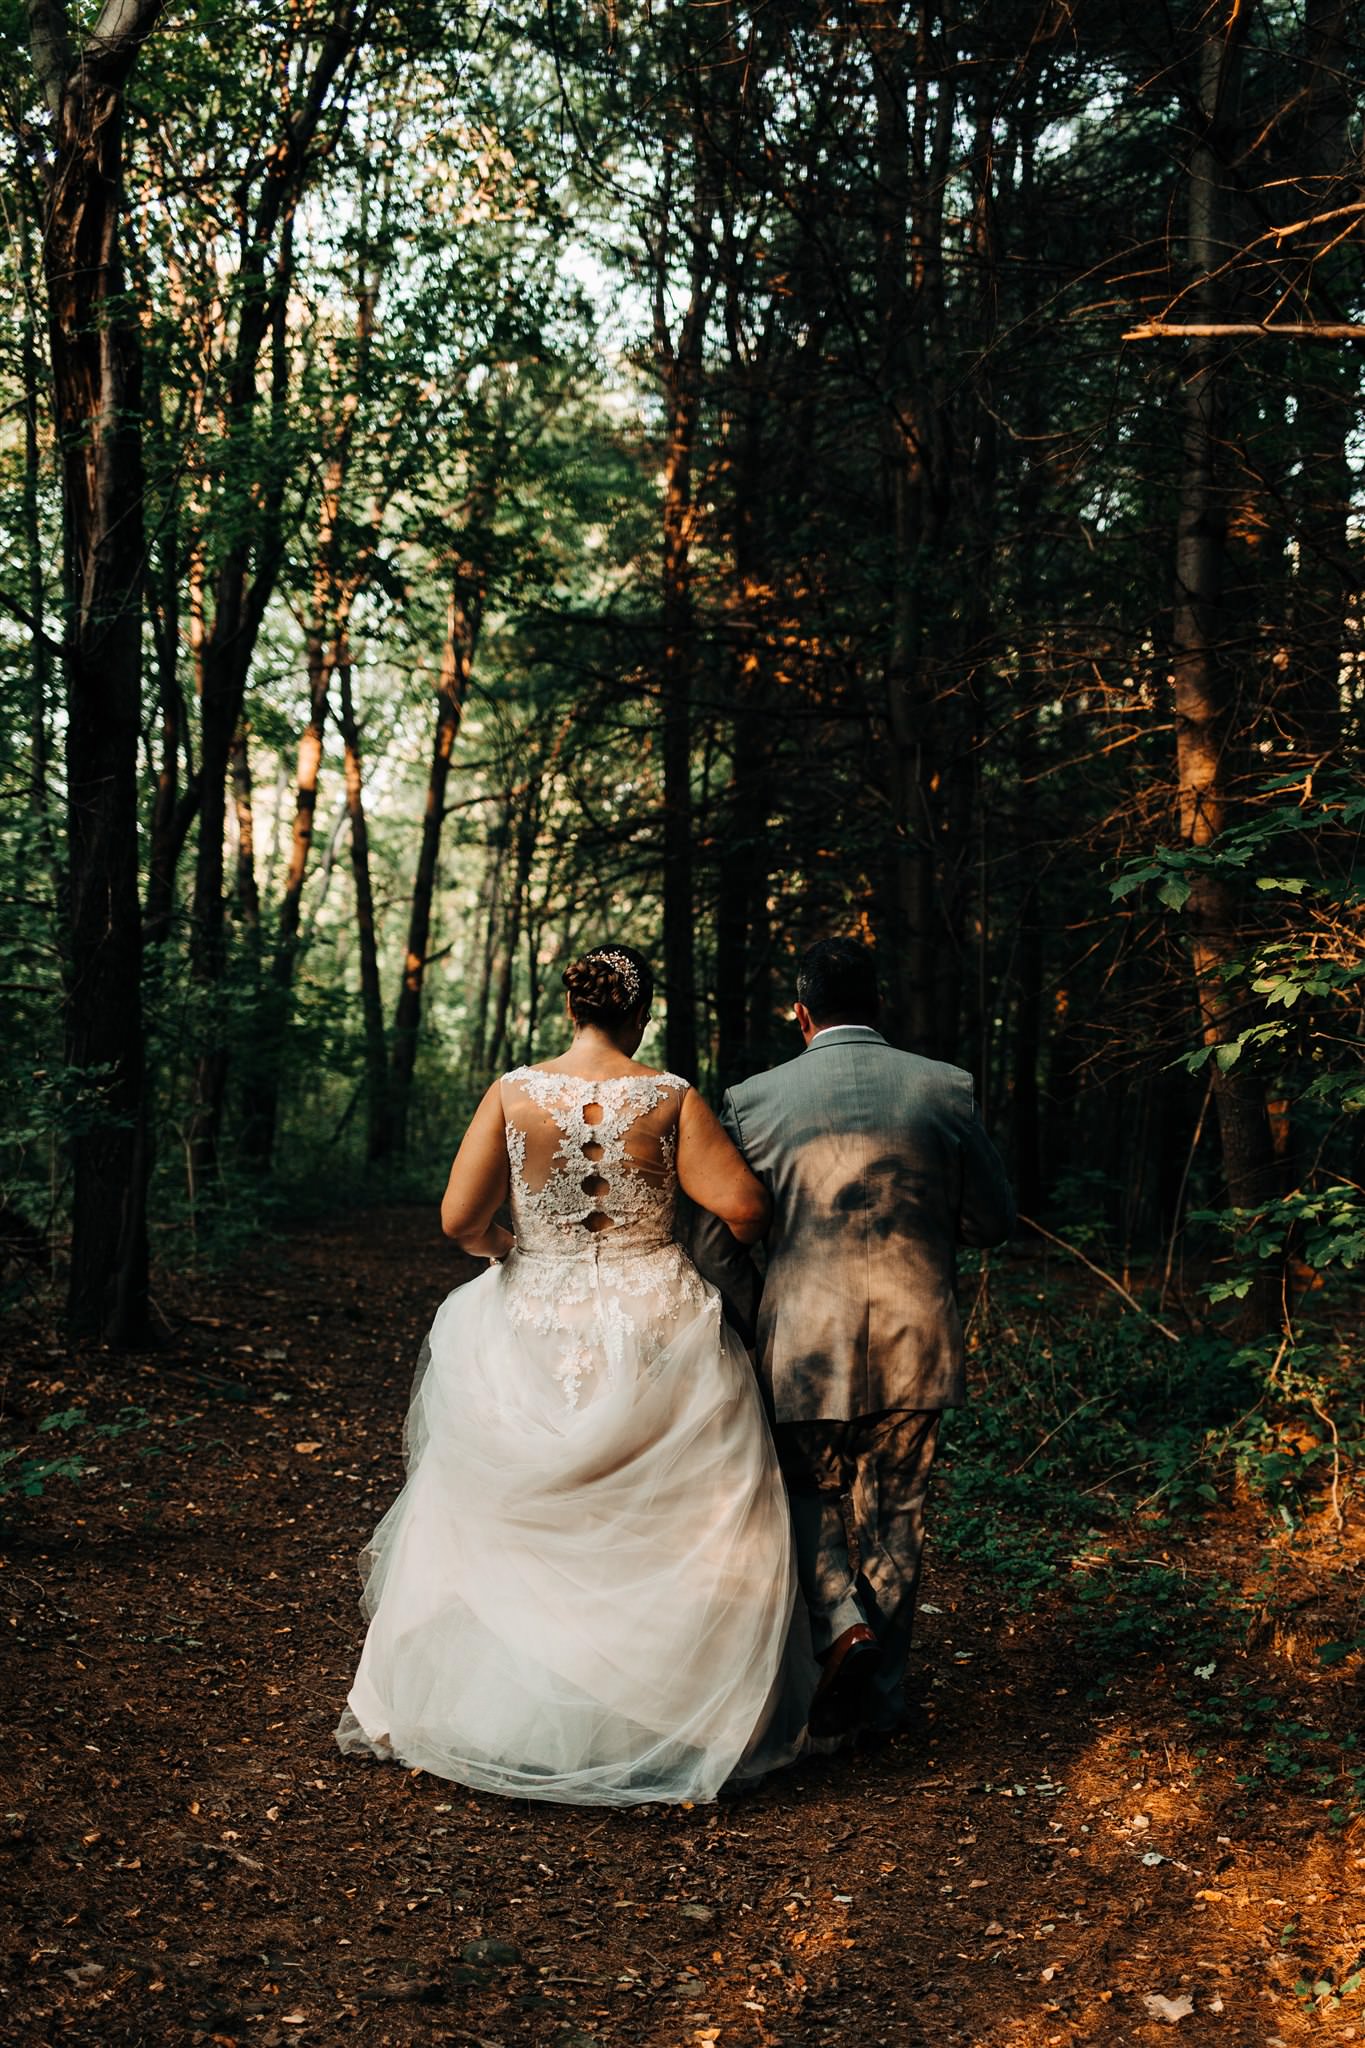 The bride and groom walk through dappled light in the woods on the way back to the fontainebleau Inn.